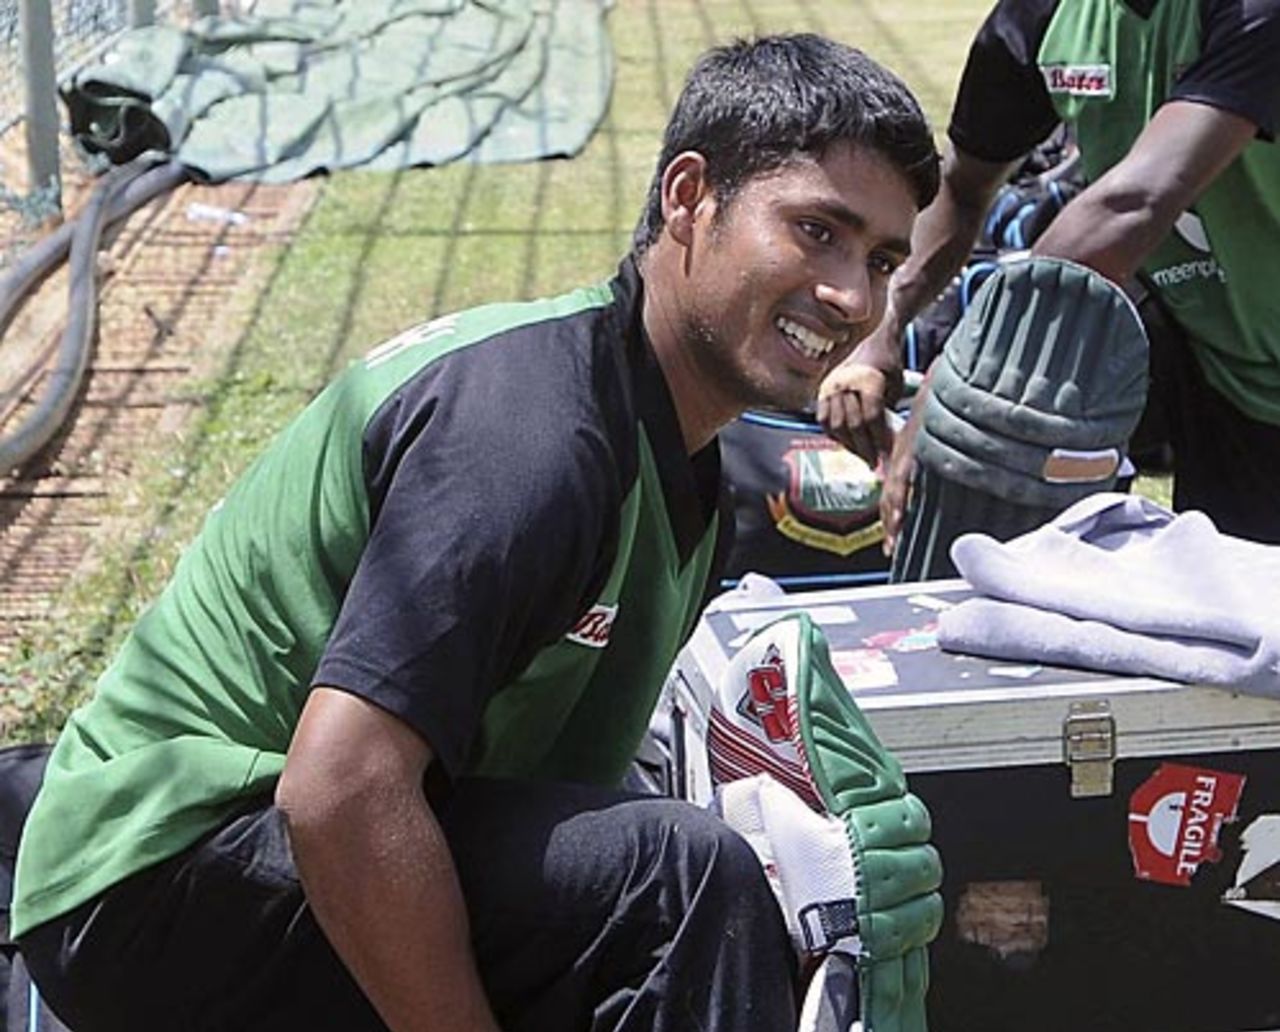 Mohammad Ashraful pads up on the eve of Bangladesh's match against Pakistan, Asia Cup, June 20, 2010